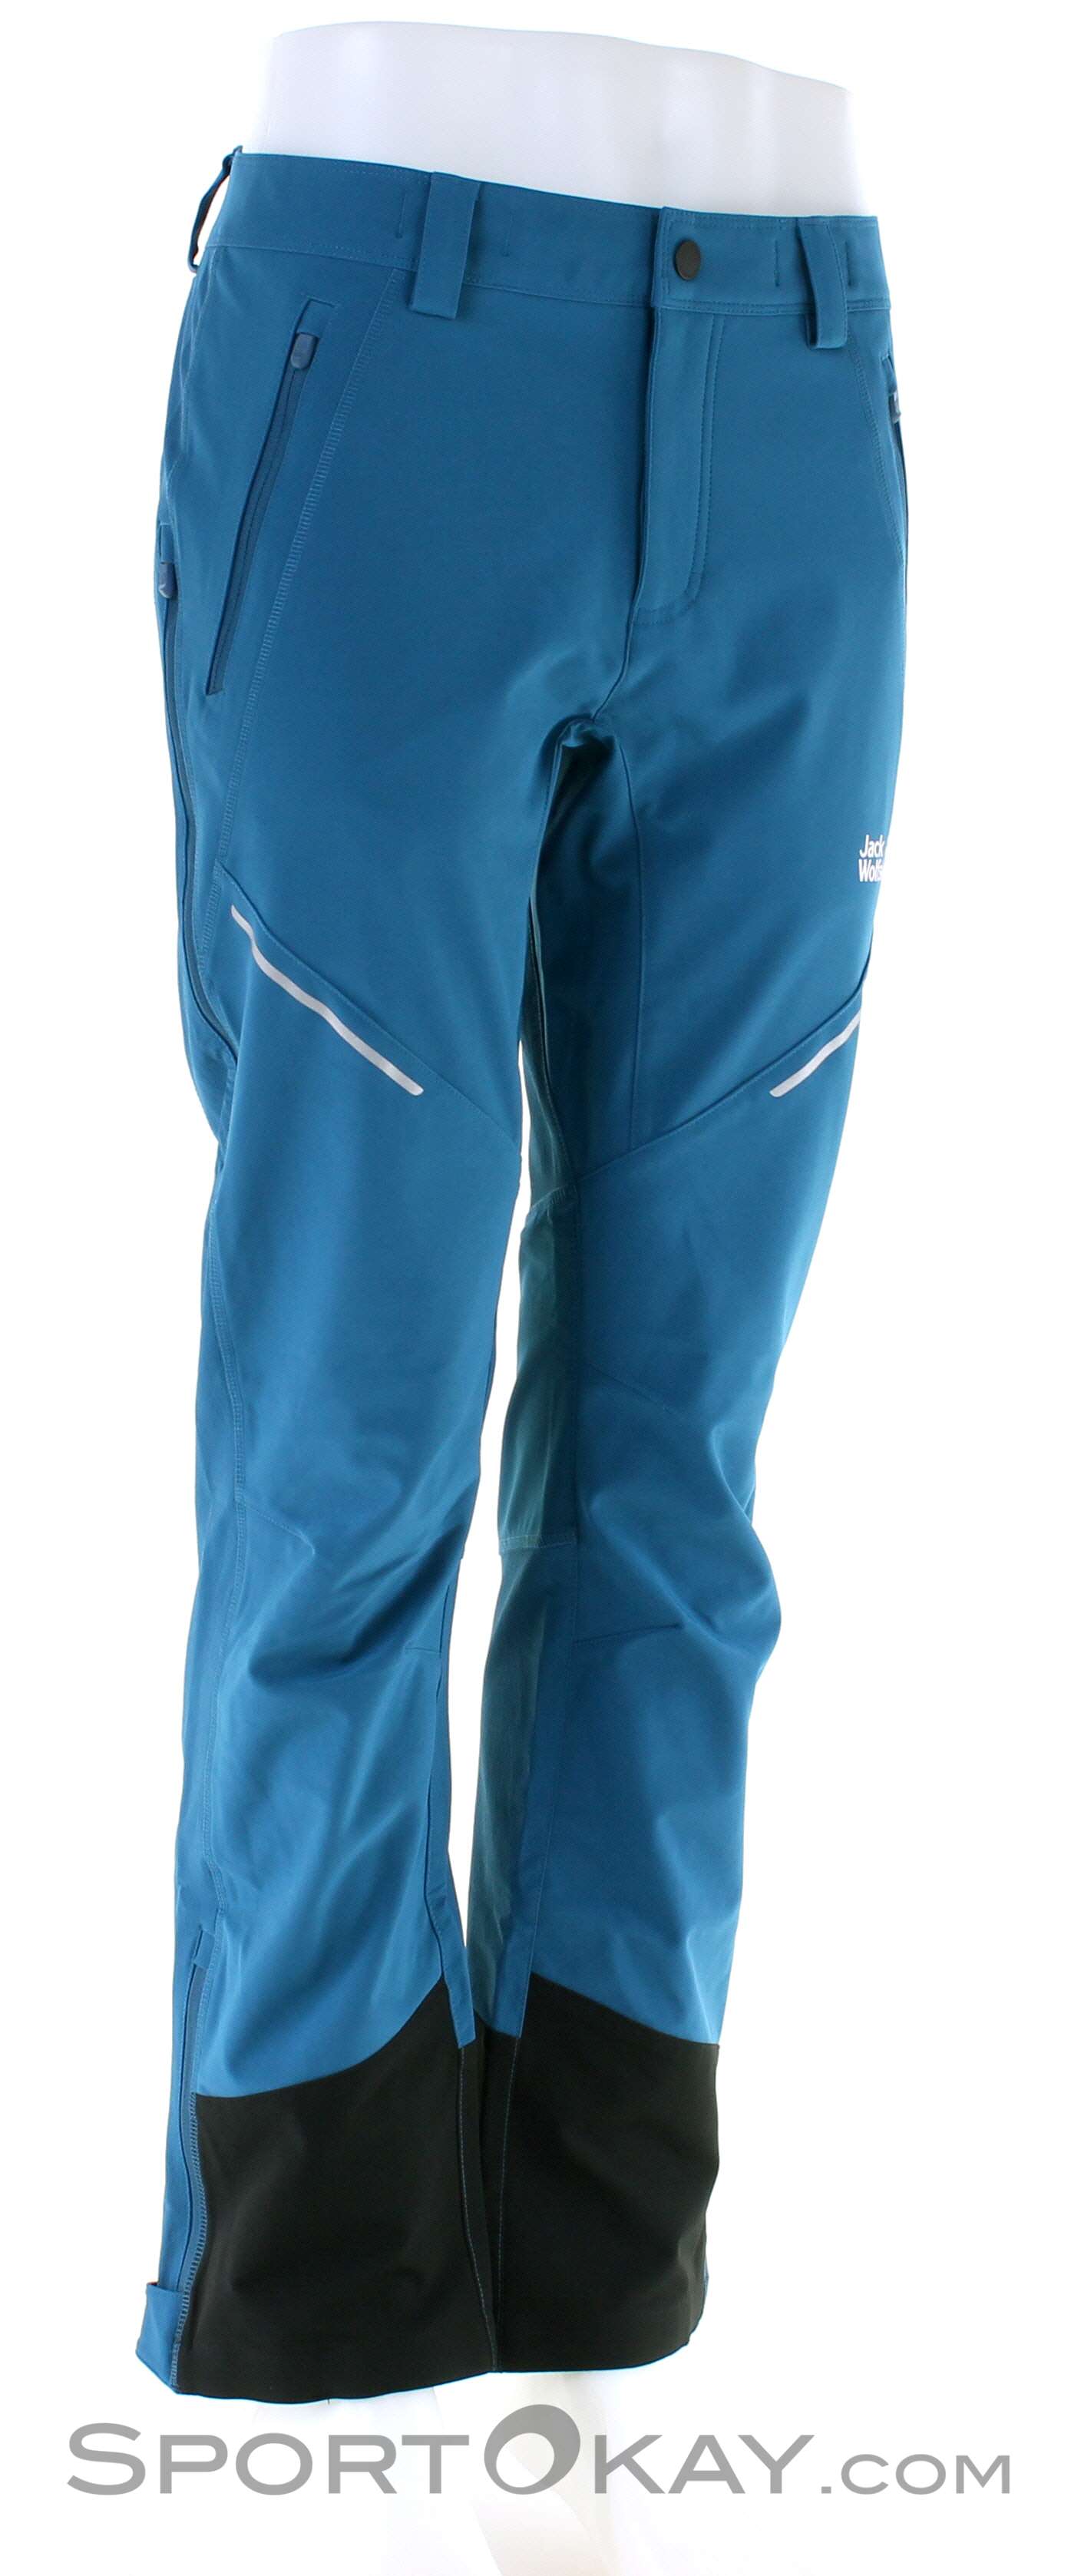 Jack Wolfskin Gravity Slope Mens Ski Touring Pants - Pants - Clothing - Outdoor - All